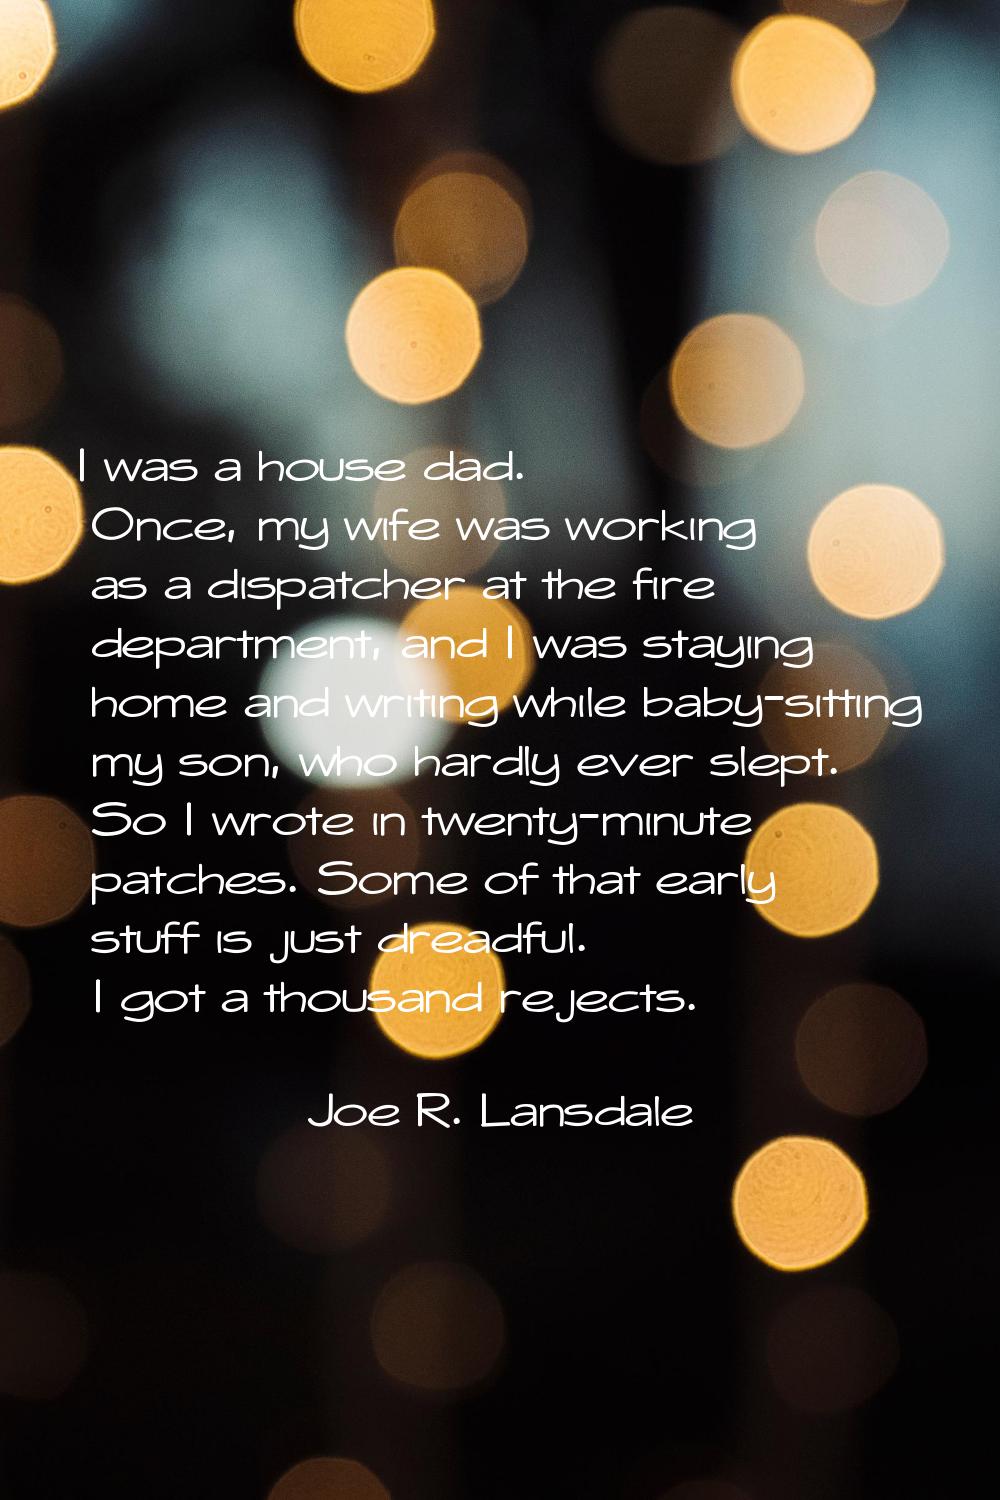 I was a house dad. Once, my wife was working as a dispatcher at the fire department, and I was stay